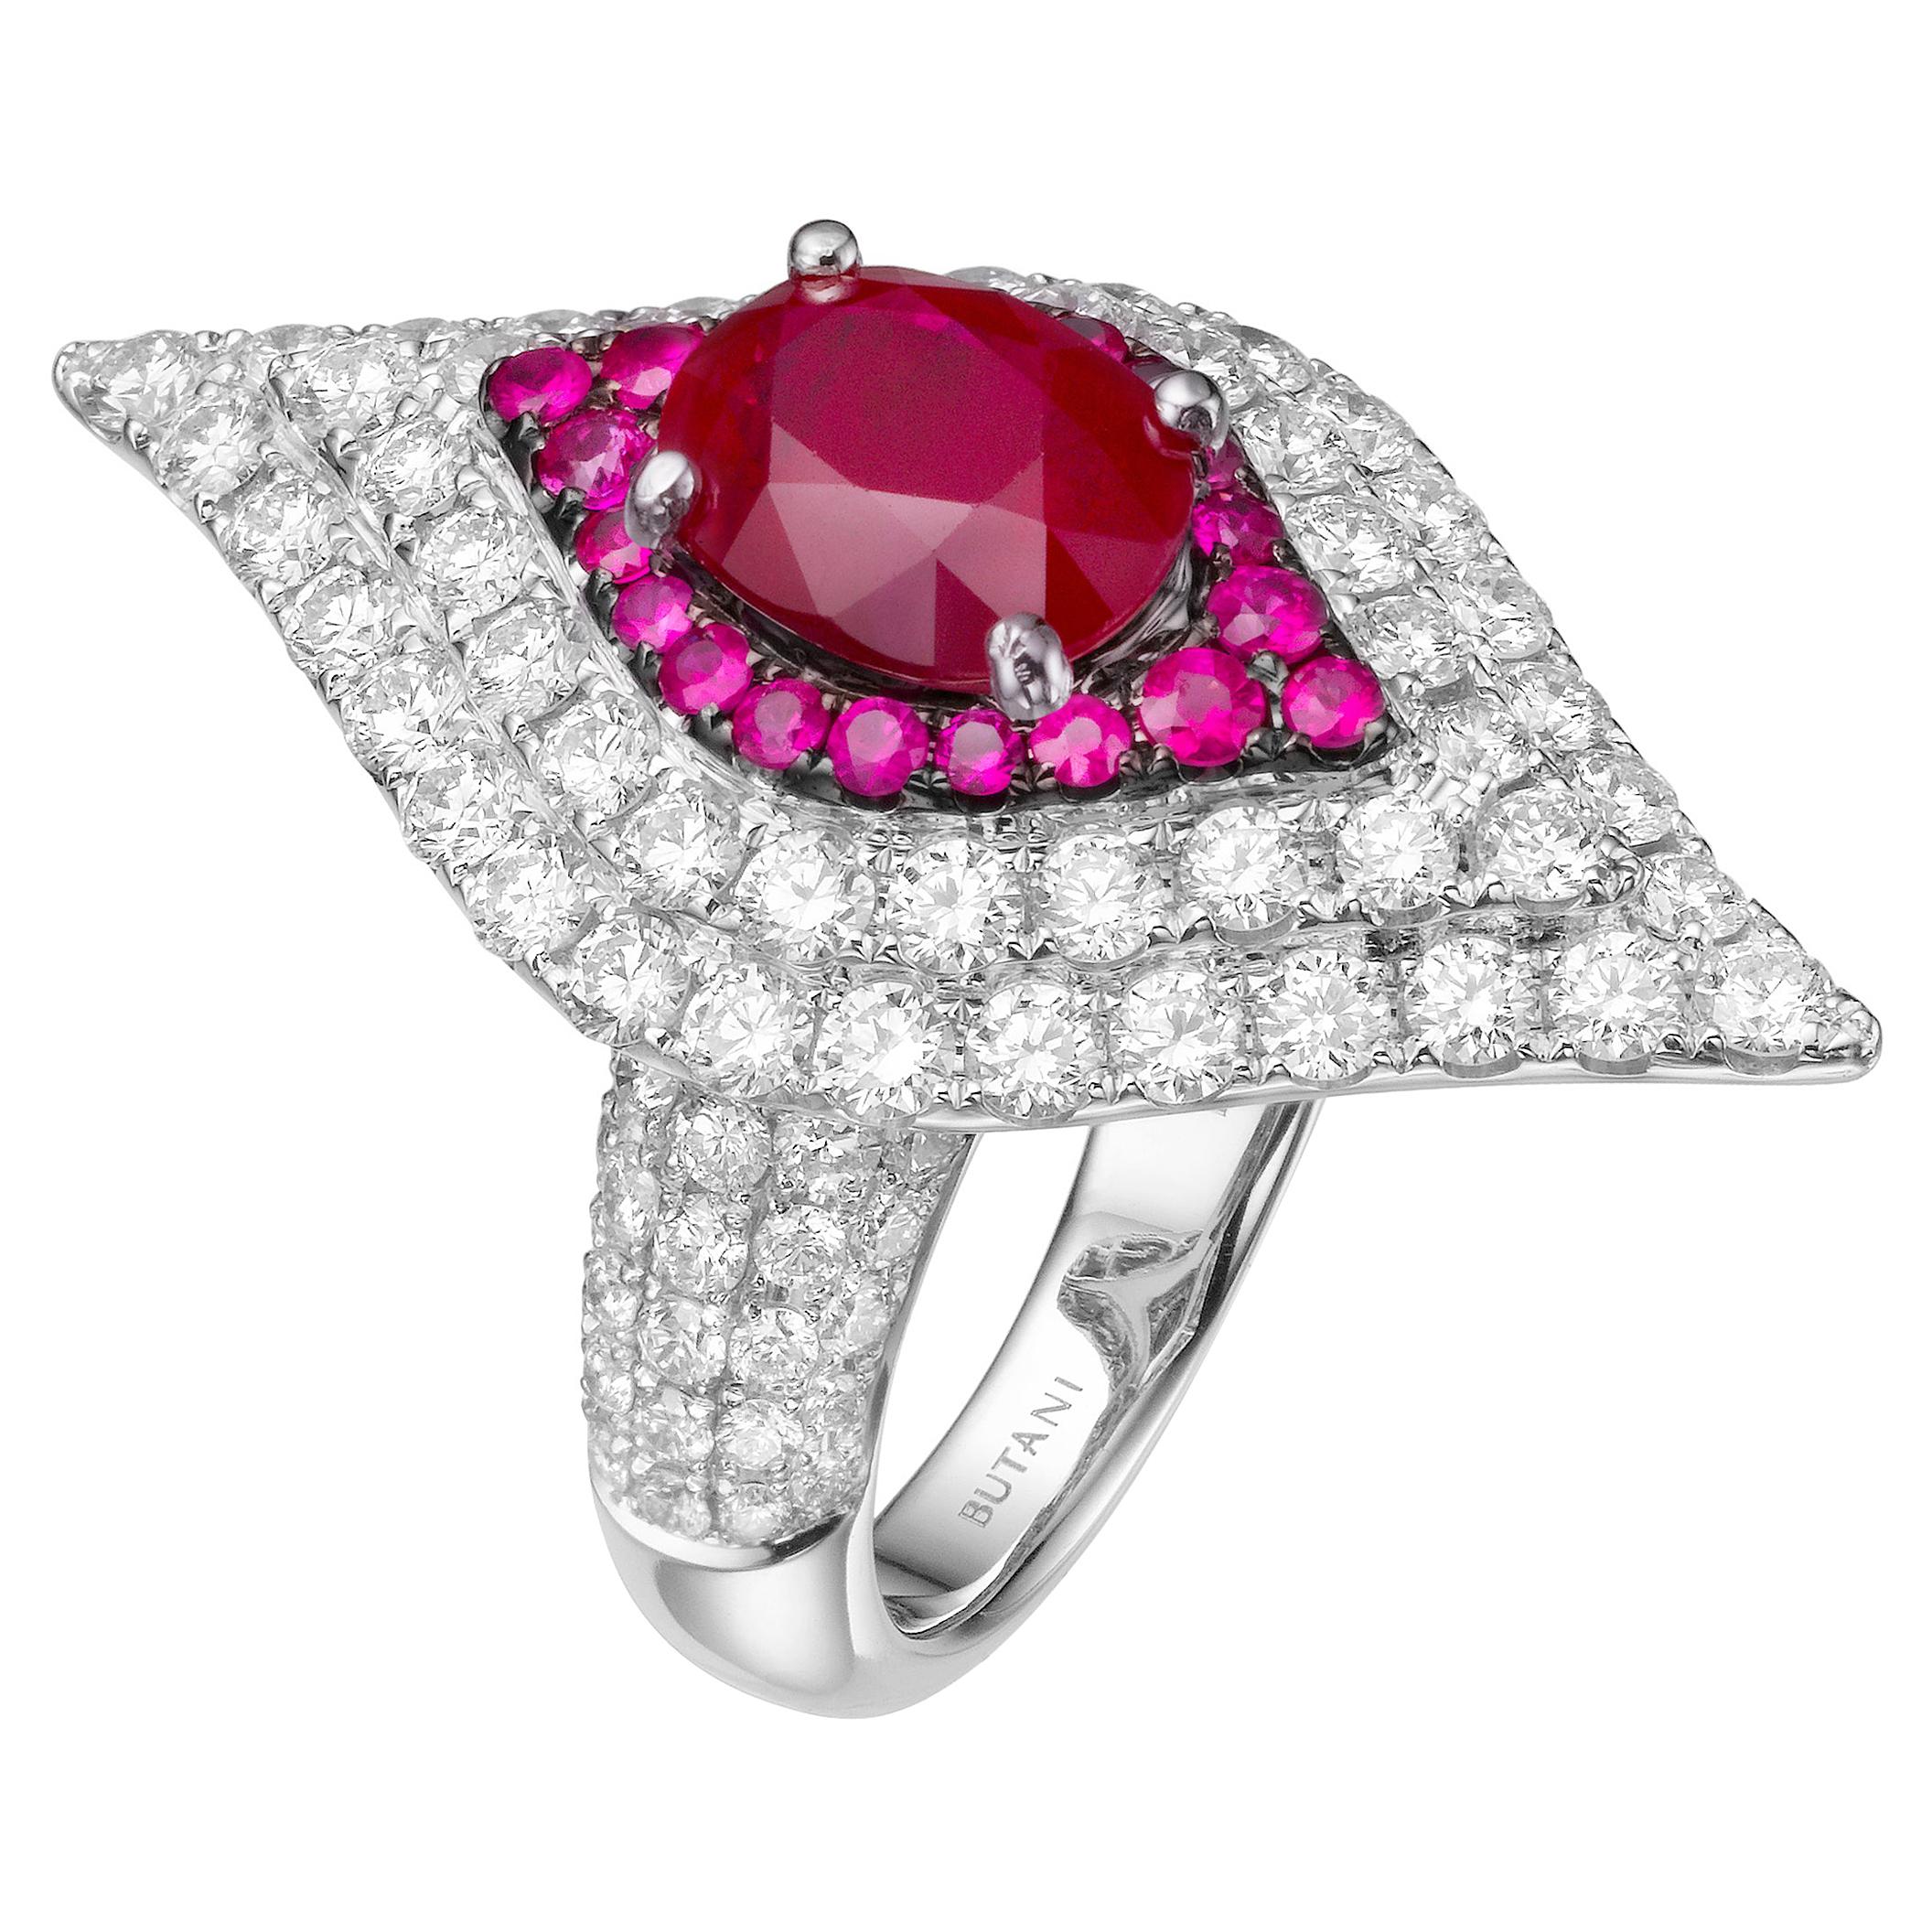 2.33 Carat Oval Ruby 18 Karat White Gold Diamond Cocktail Ring For Sale